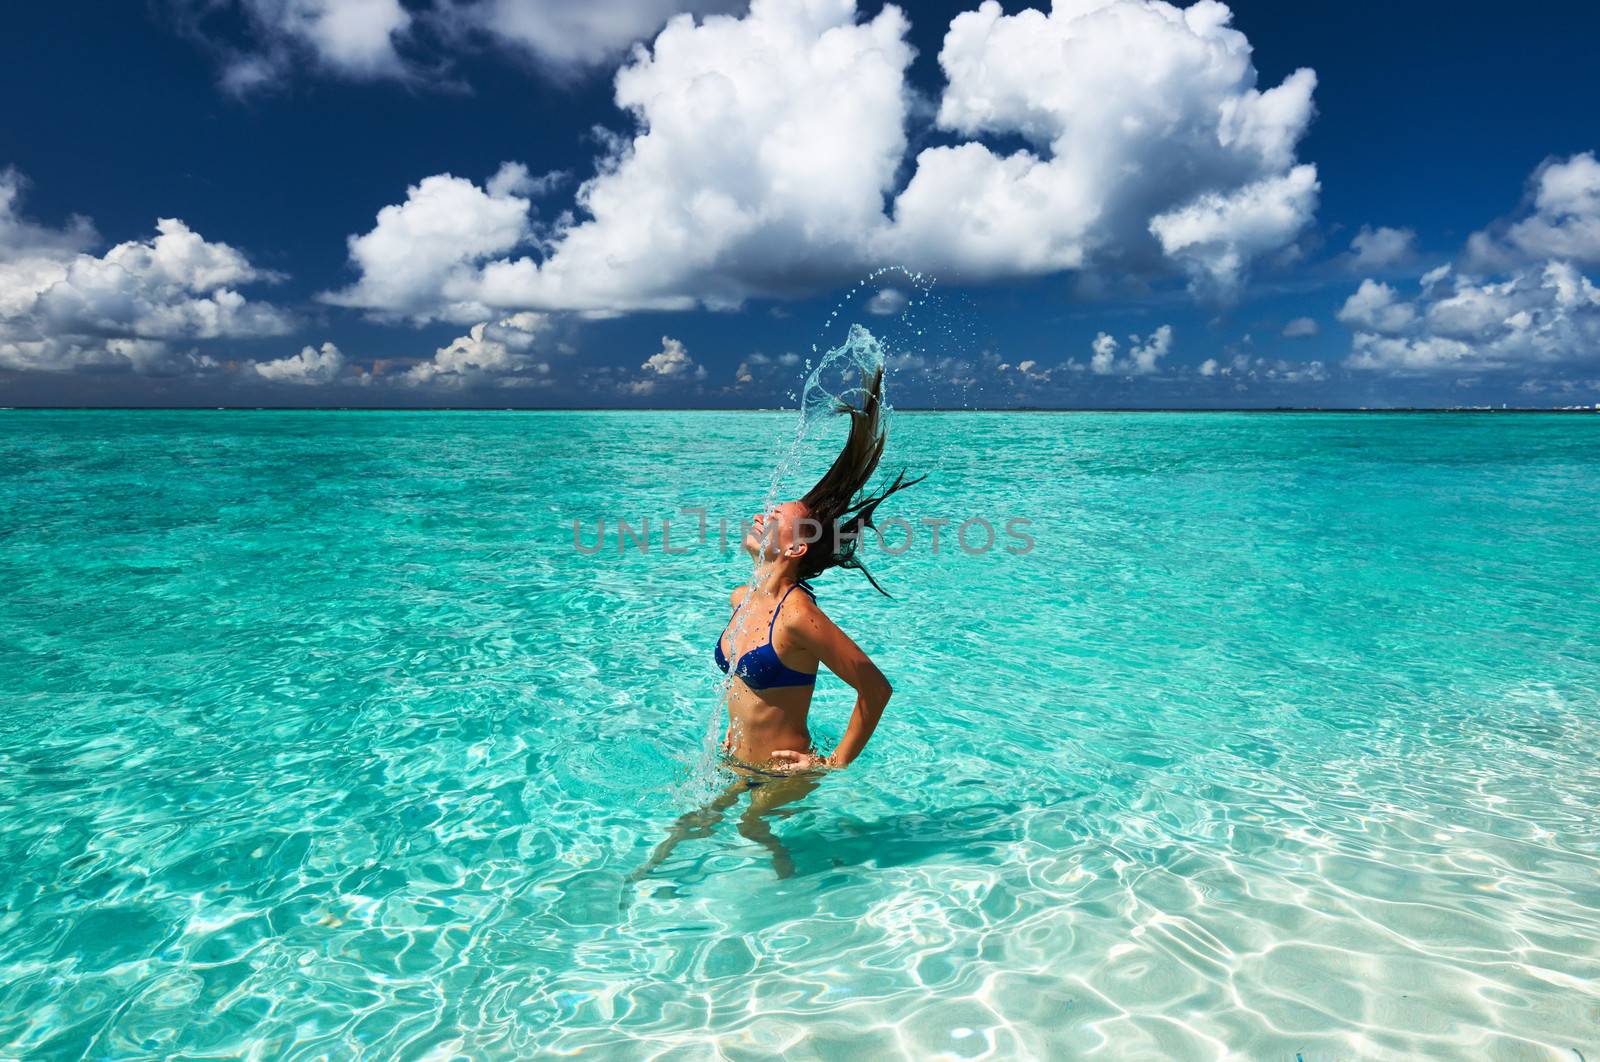 Woman splashing water with hair in the ocean by haveseen